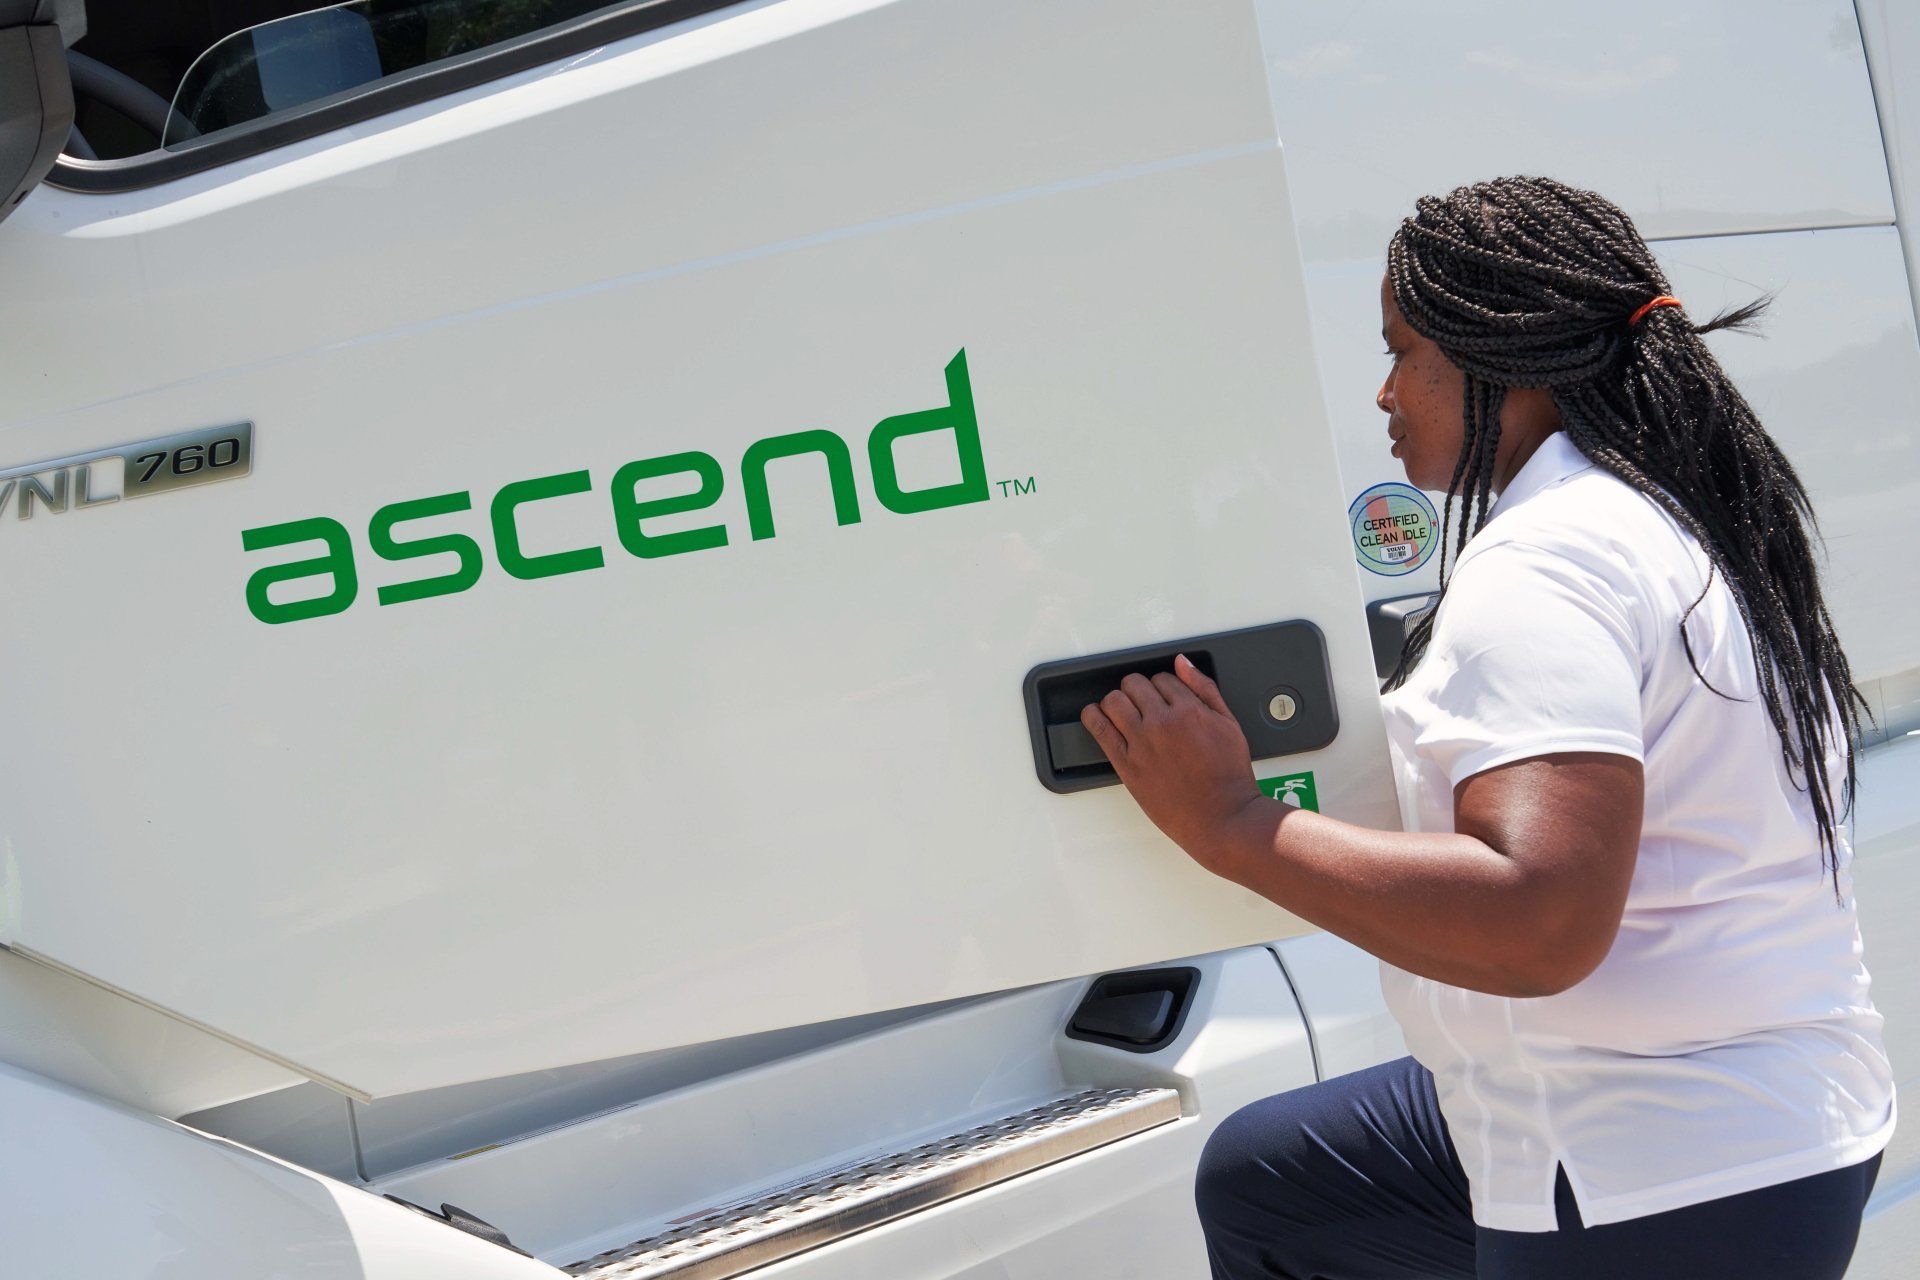 Ascend owner operator in Tennessee getting into the truck